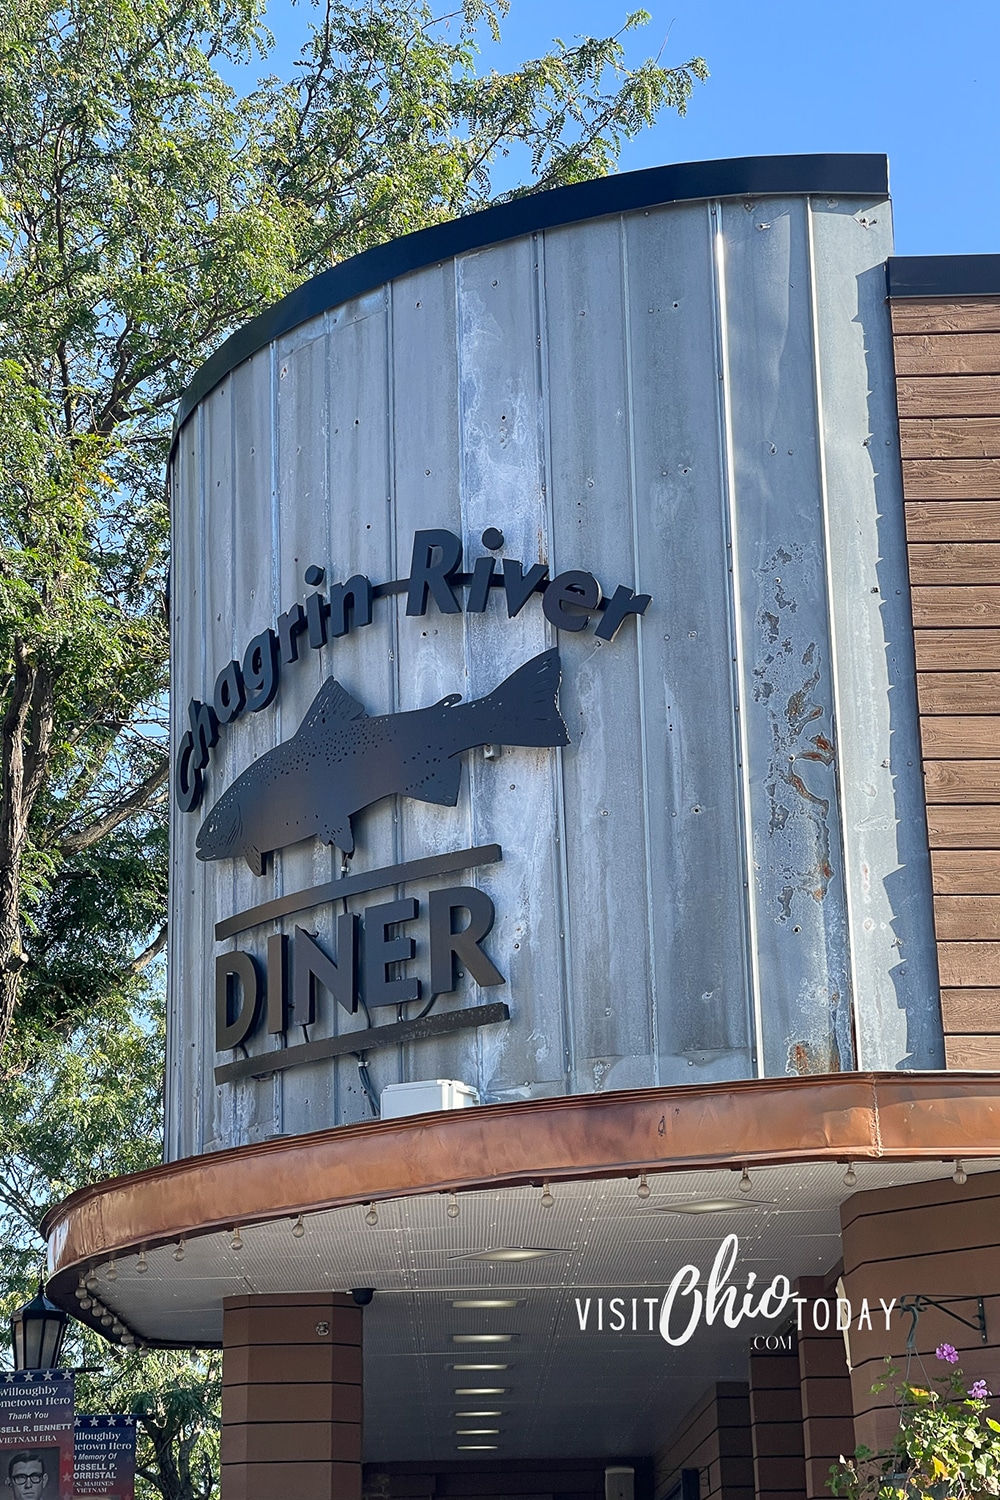 vertical photo of the outside sign of the Chagrin River Diner. Photo credit: Cindy Gordon of VisitOhioToday.com